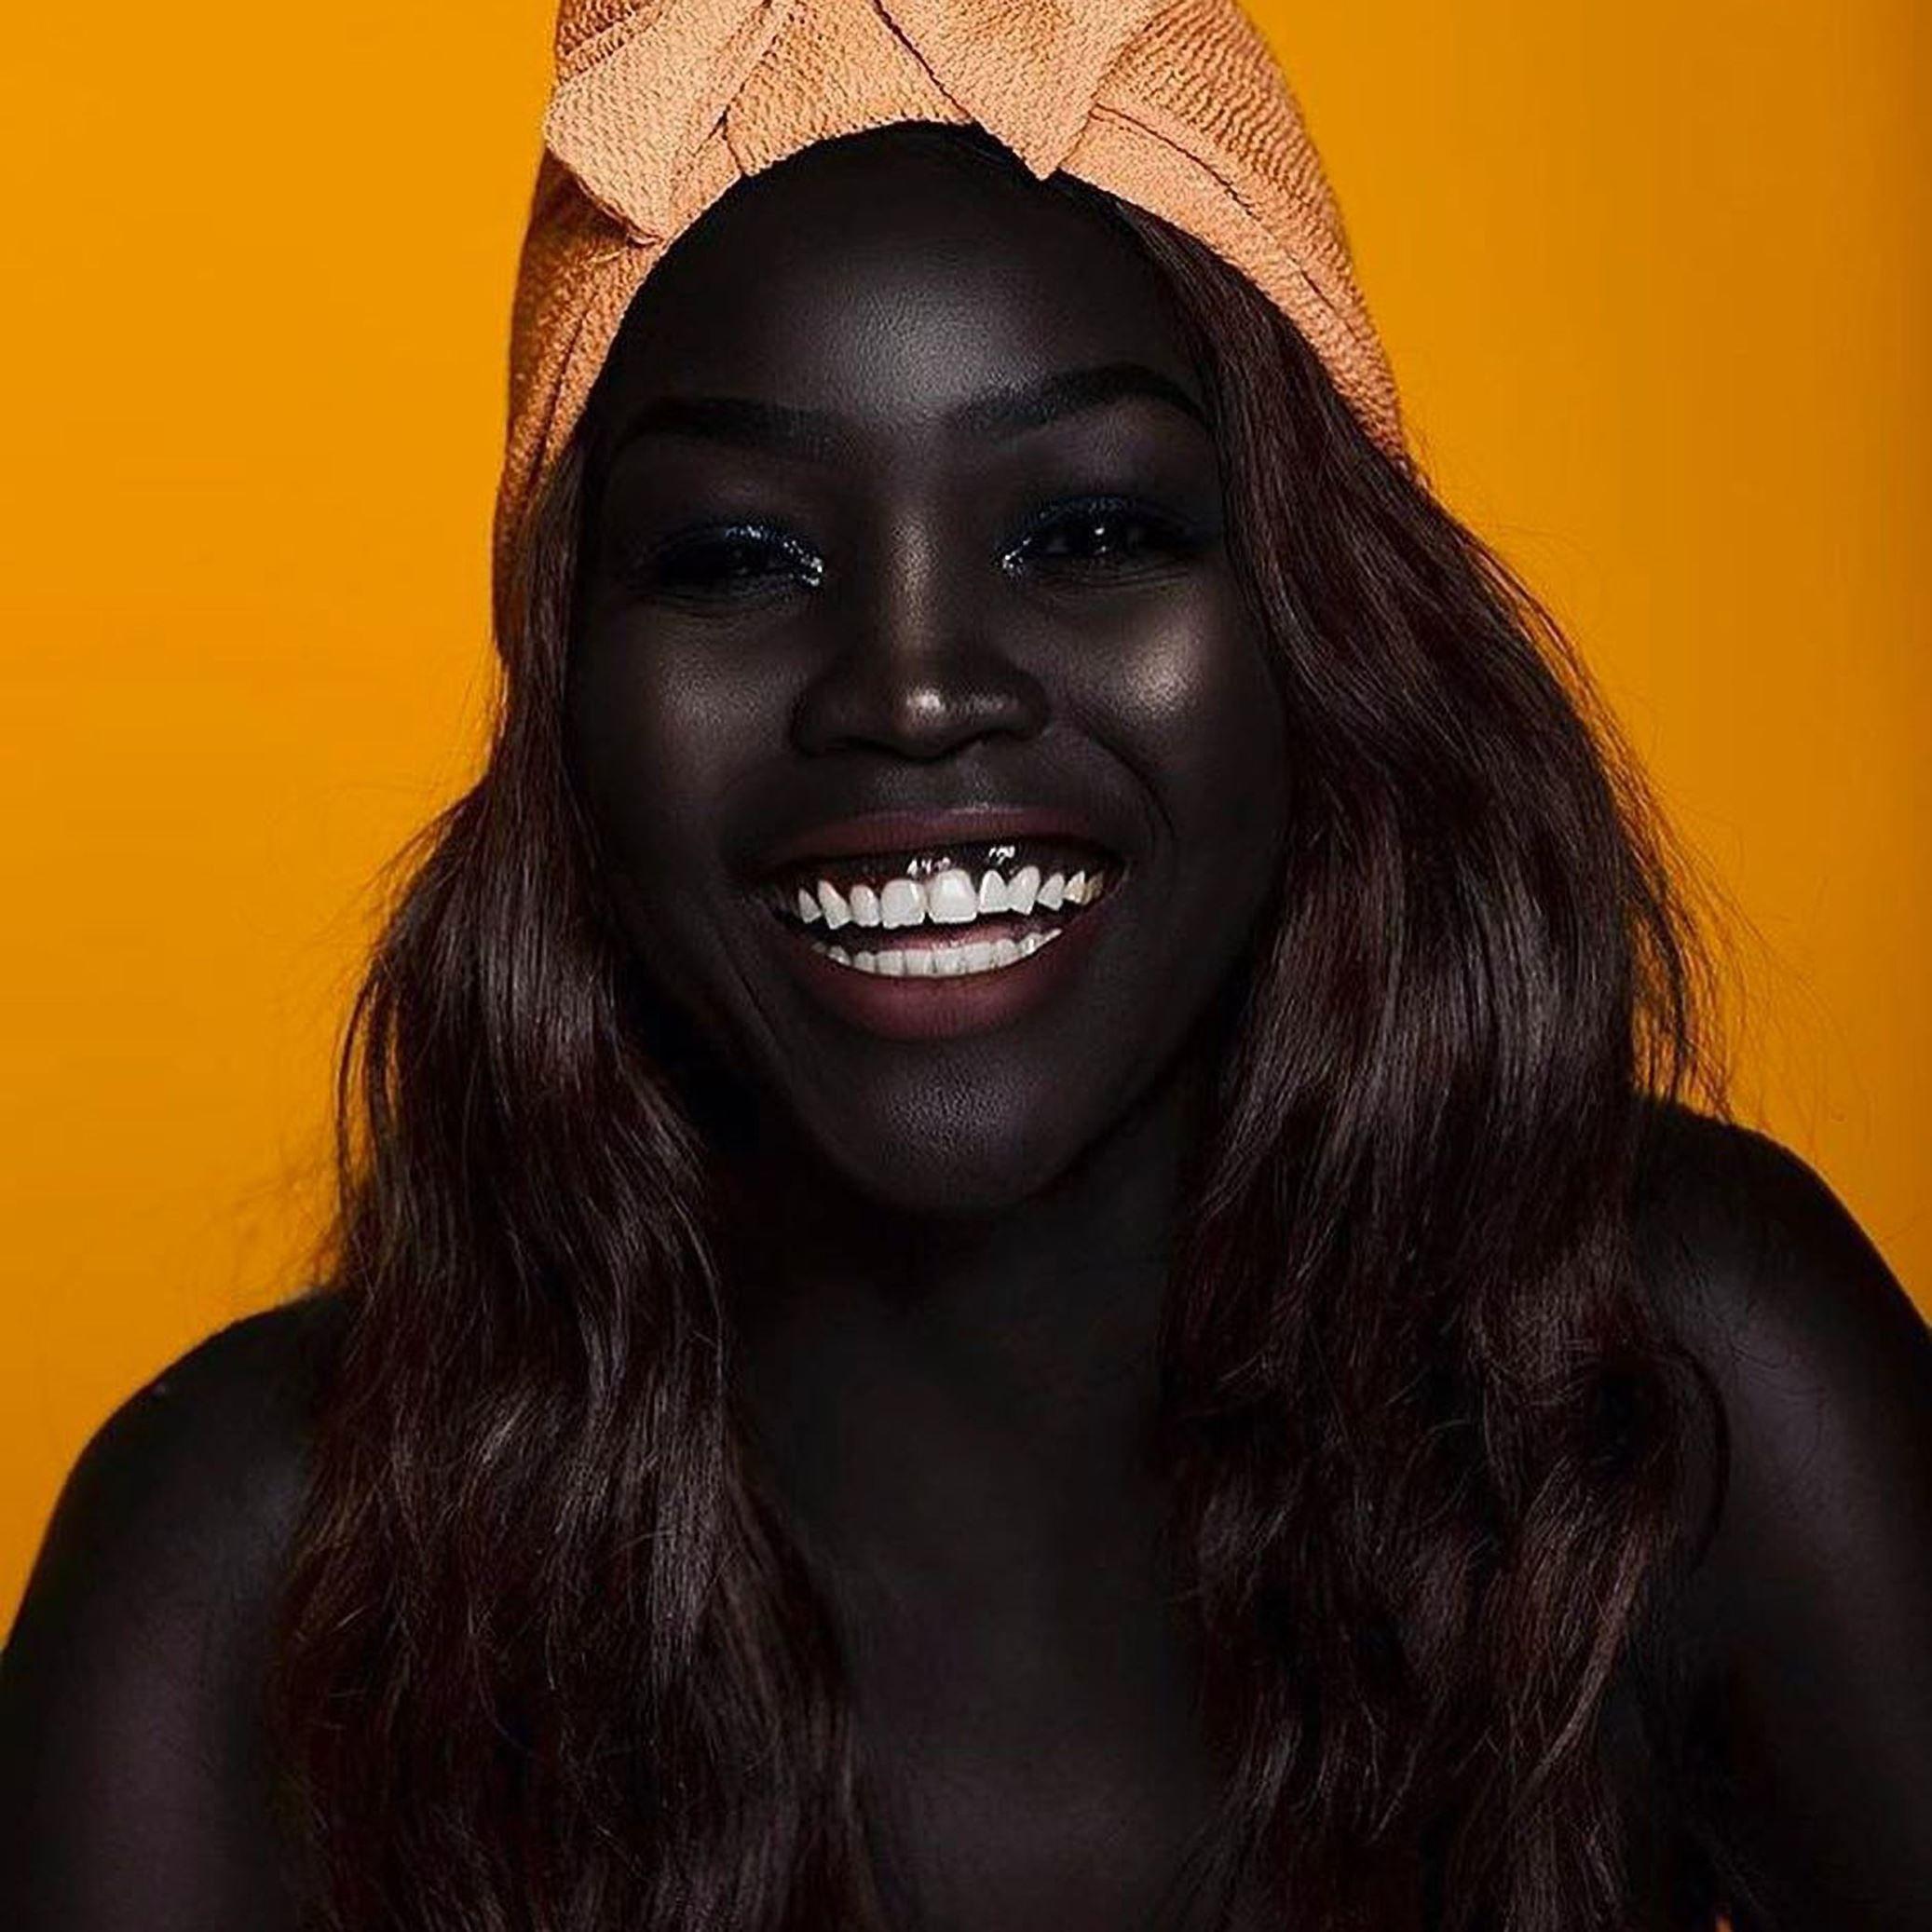 Model Nyakim Gatwech is using Instagram as a means